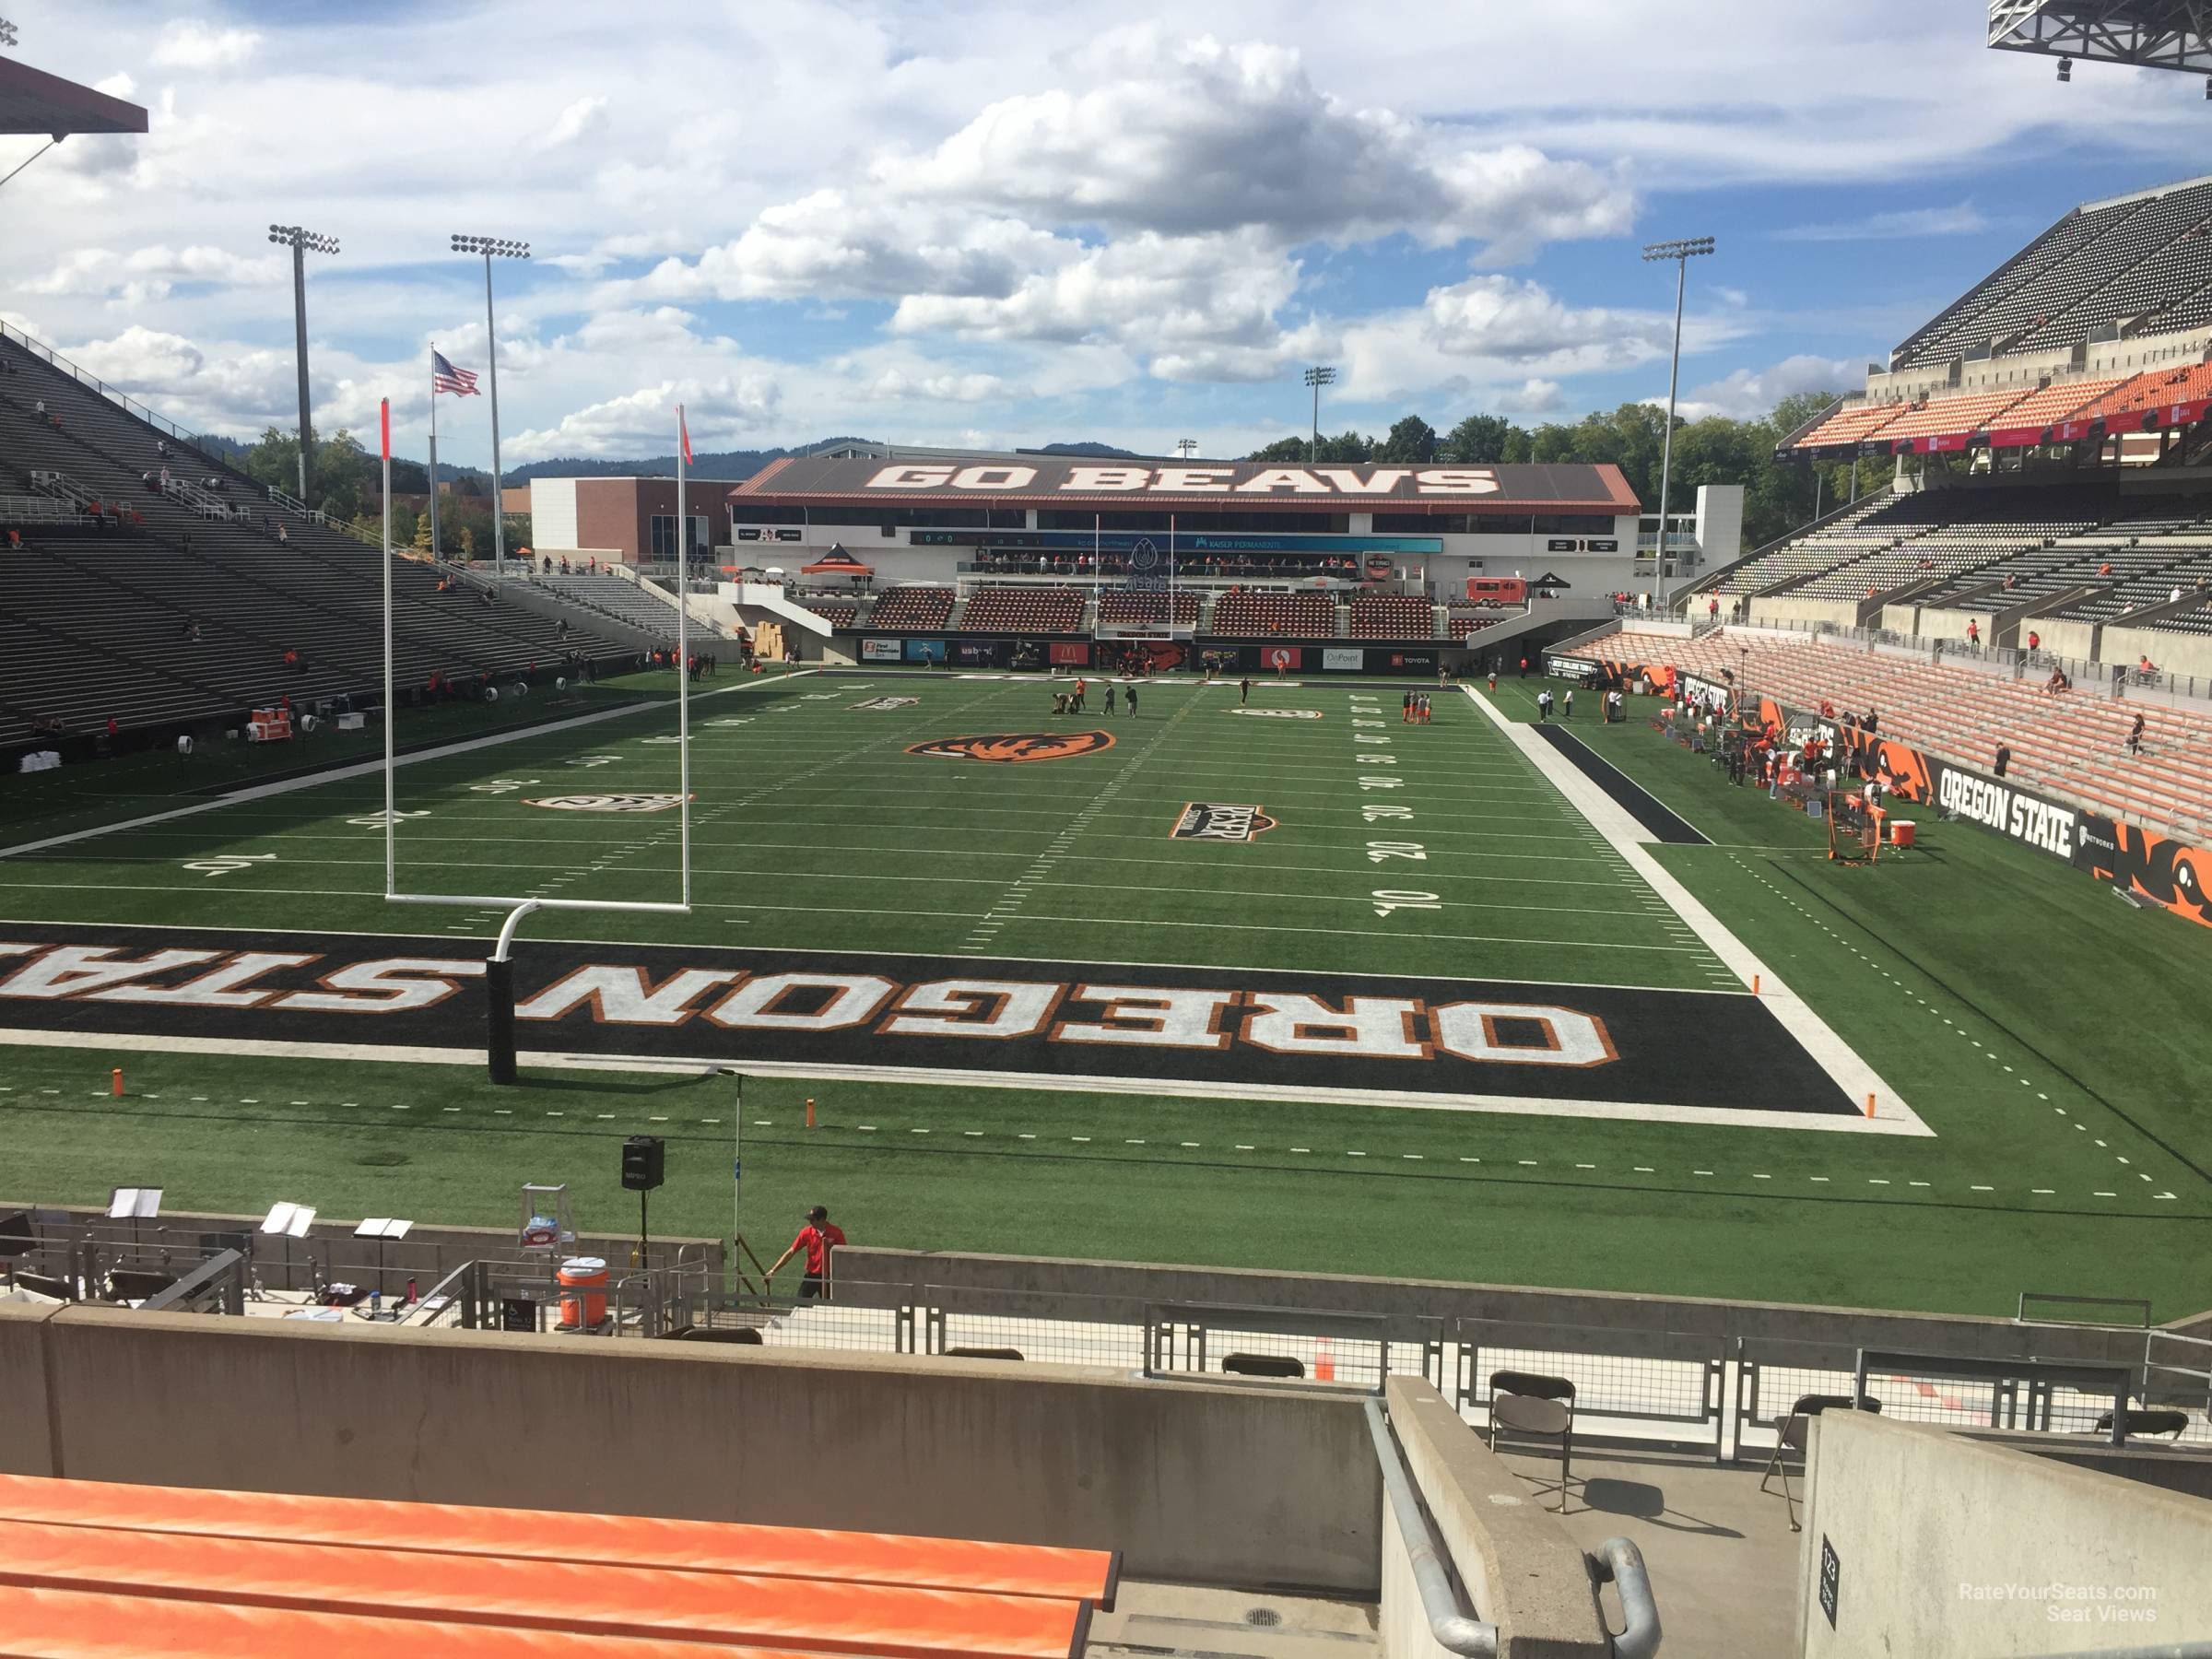 section 123, row 22 seat view  - reser stadium